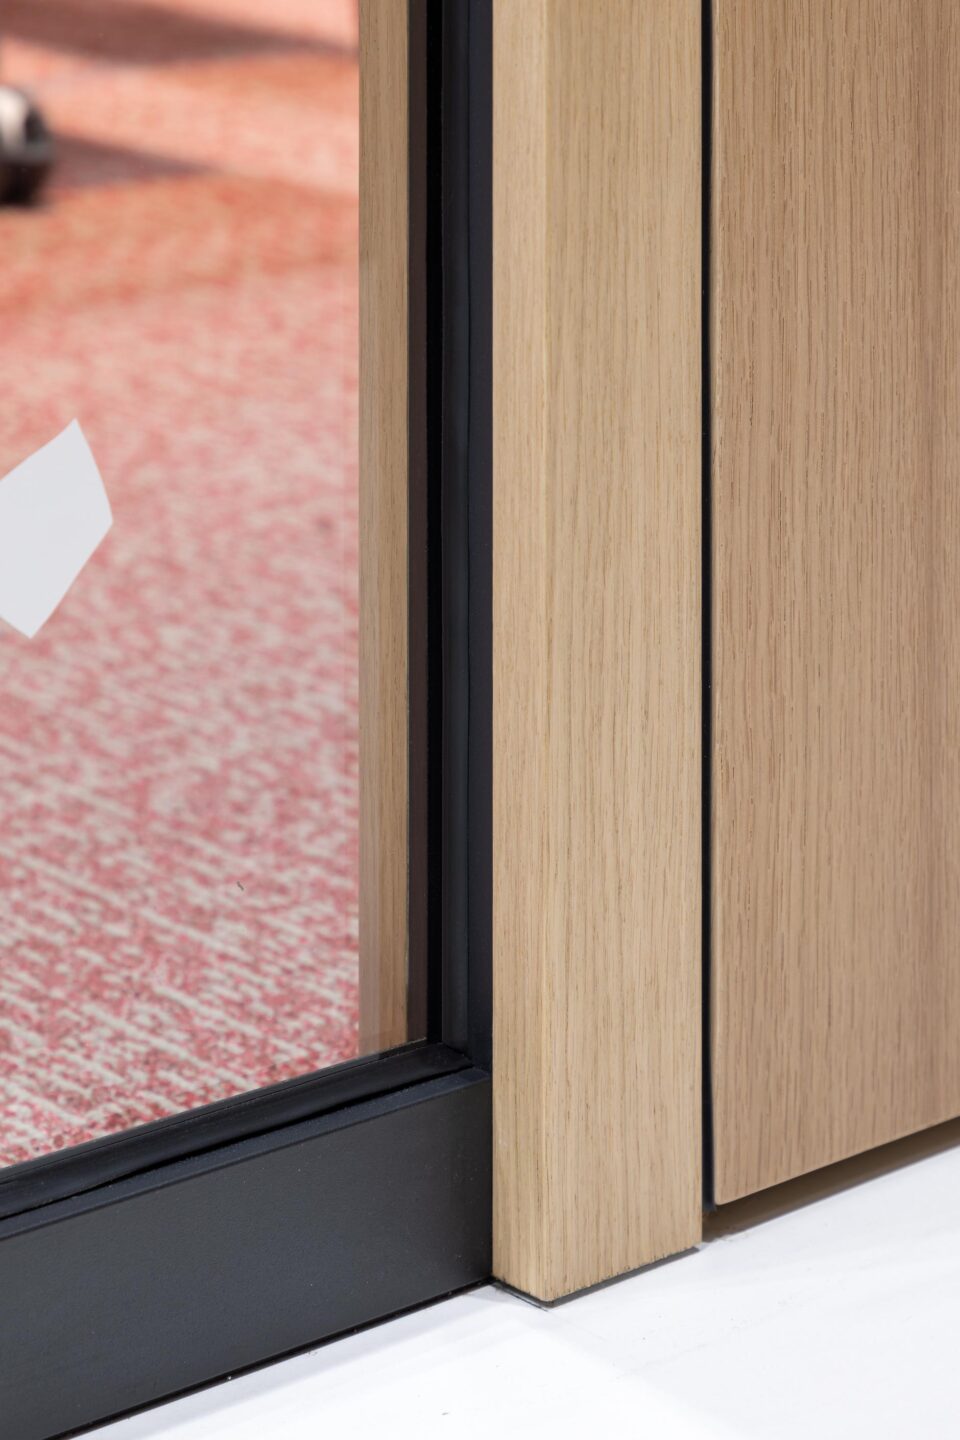 The two-part design of the system door frame with a 50-mm thin frame on the corridor side and just 18-mm thin frame on the room side also opens up new design possibilities for use within the system glass walls.